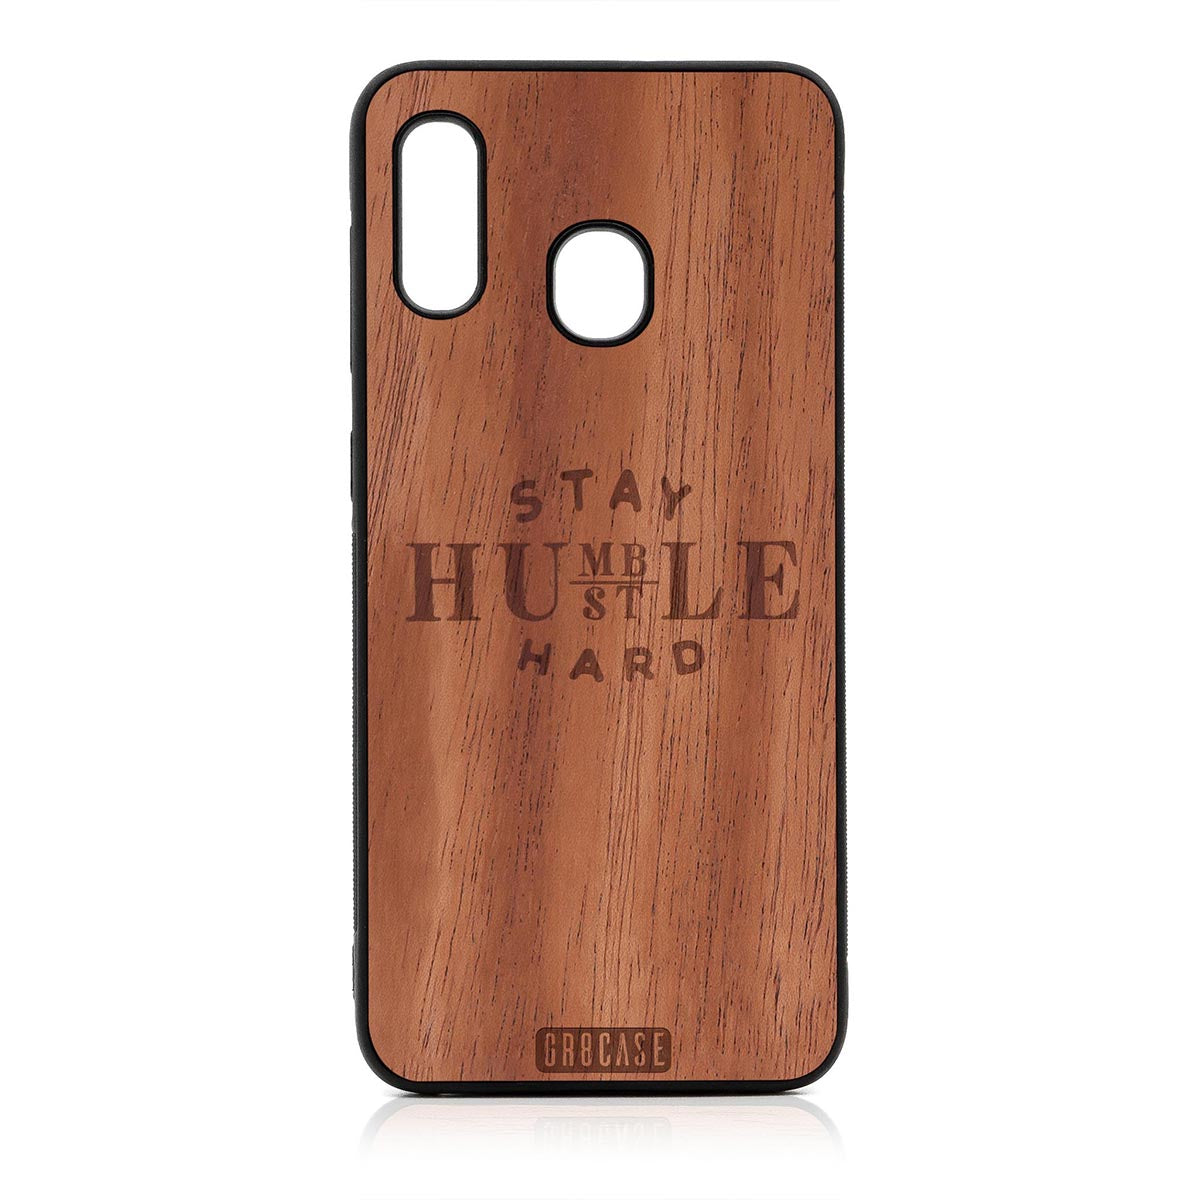 Stay Humble Hustle Hard Design Wood Case For Samsung Galaxy A20 by GR8CASE